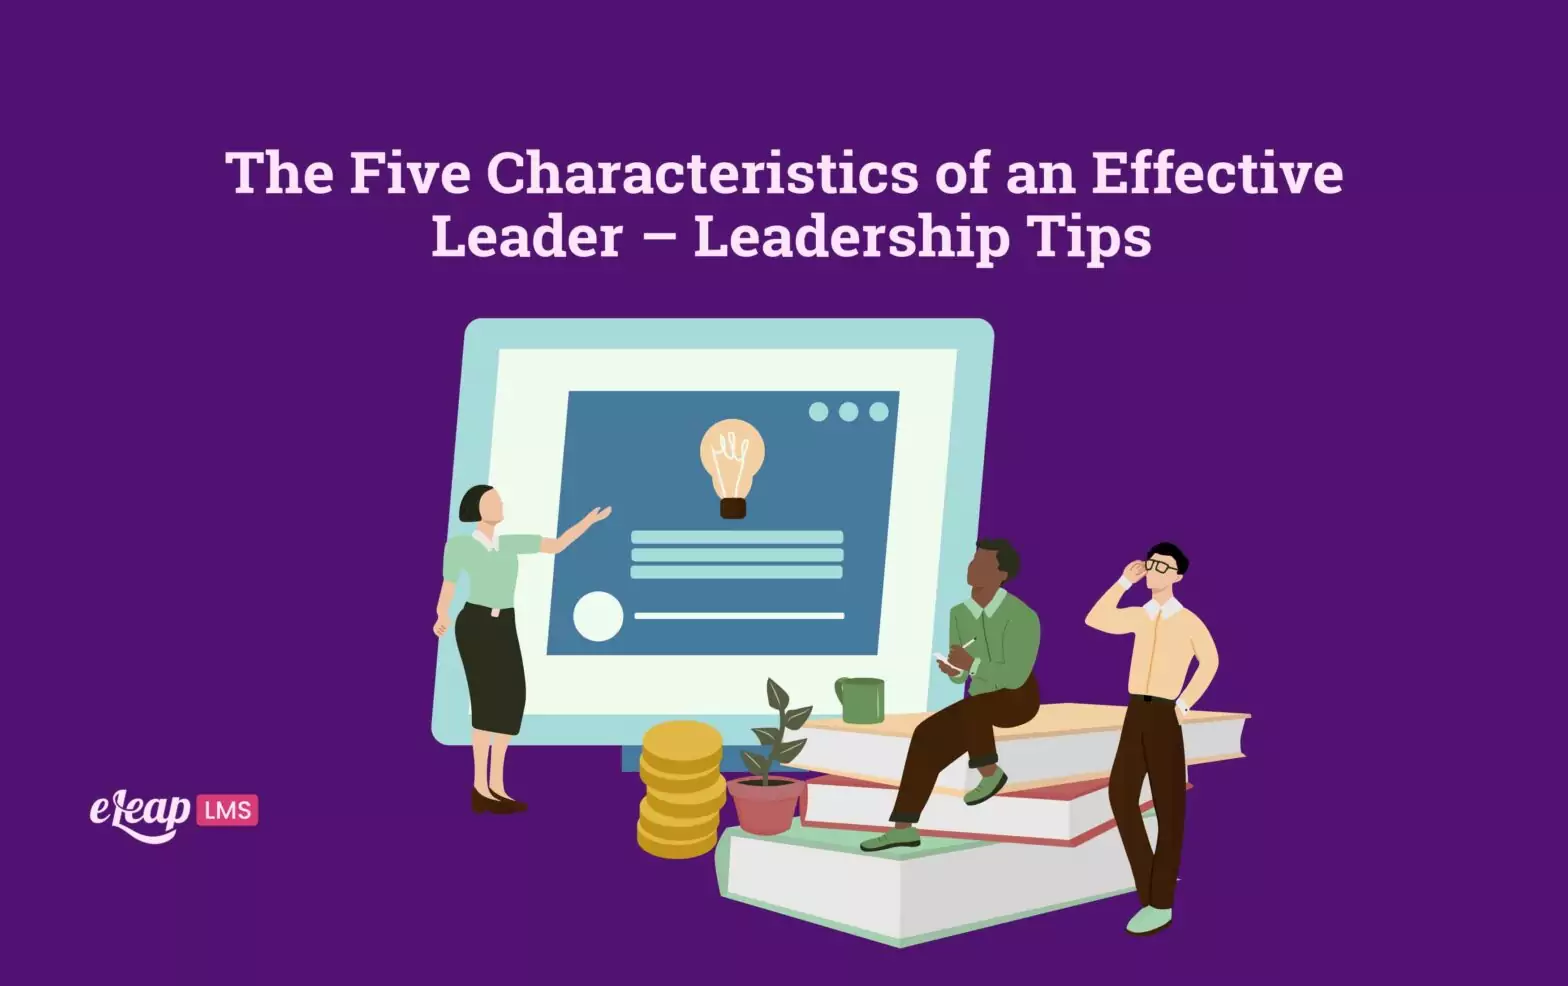 The Five Characteristics of an Effective Leader – Leadership Tips